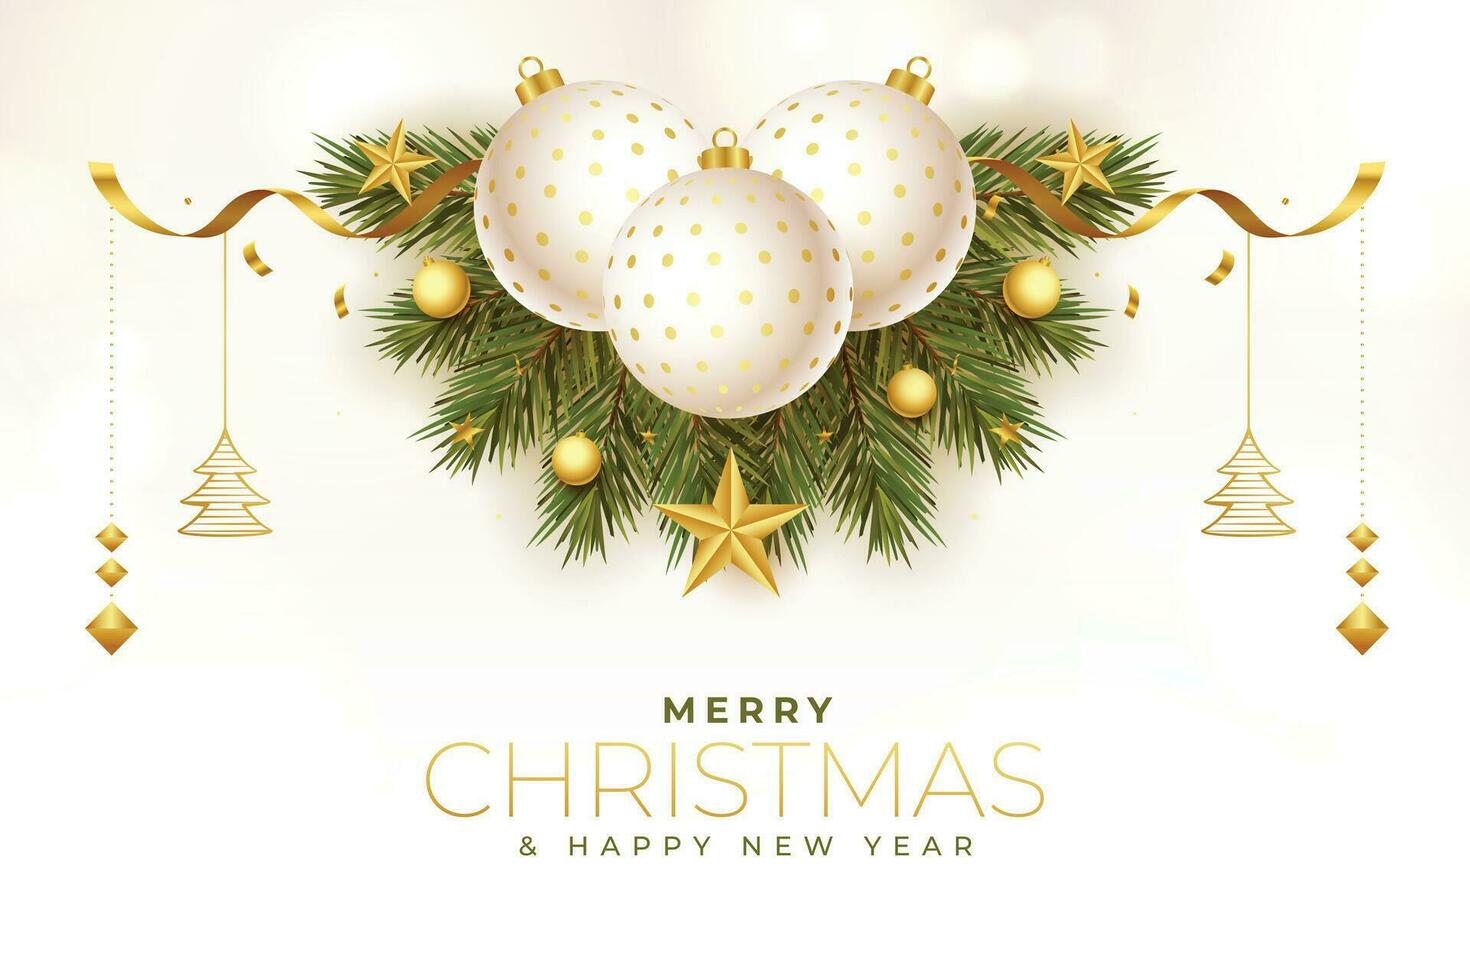 merry christmas holiday festival card with 3d decorative elements vector